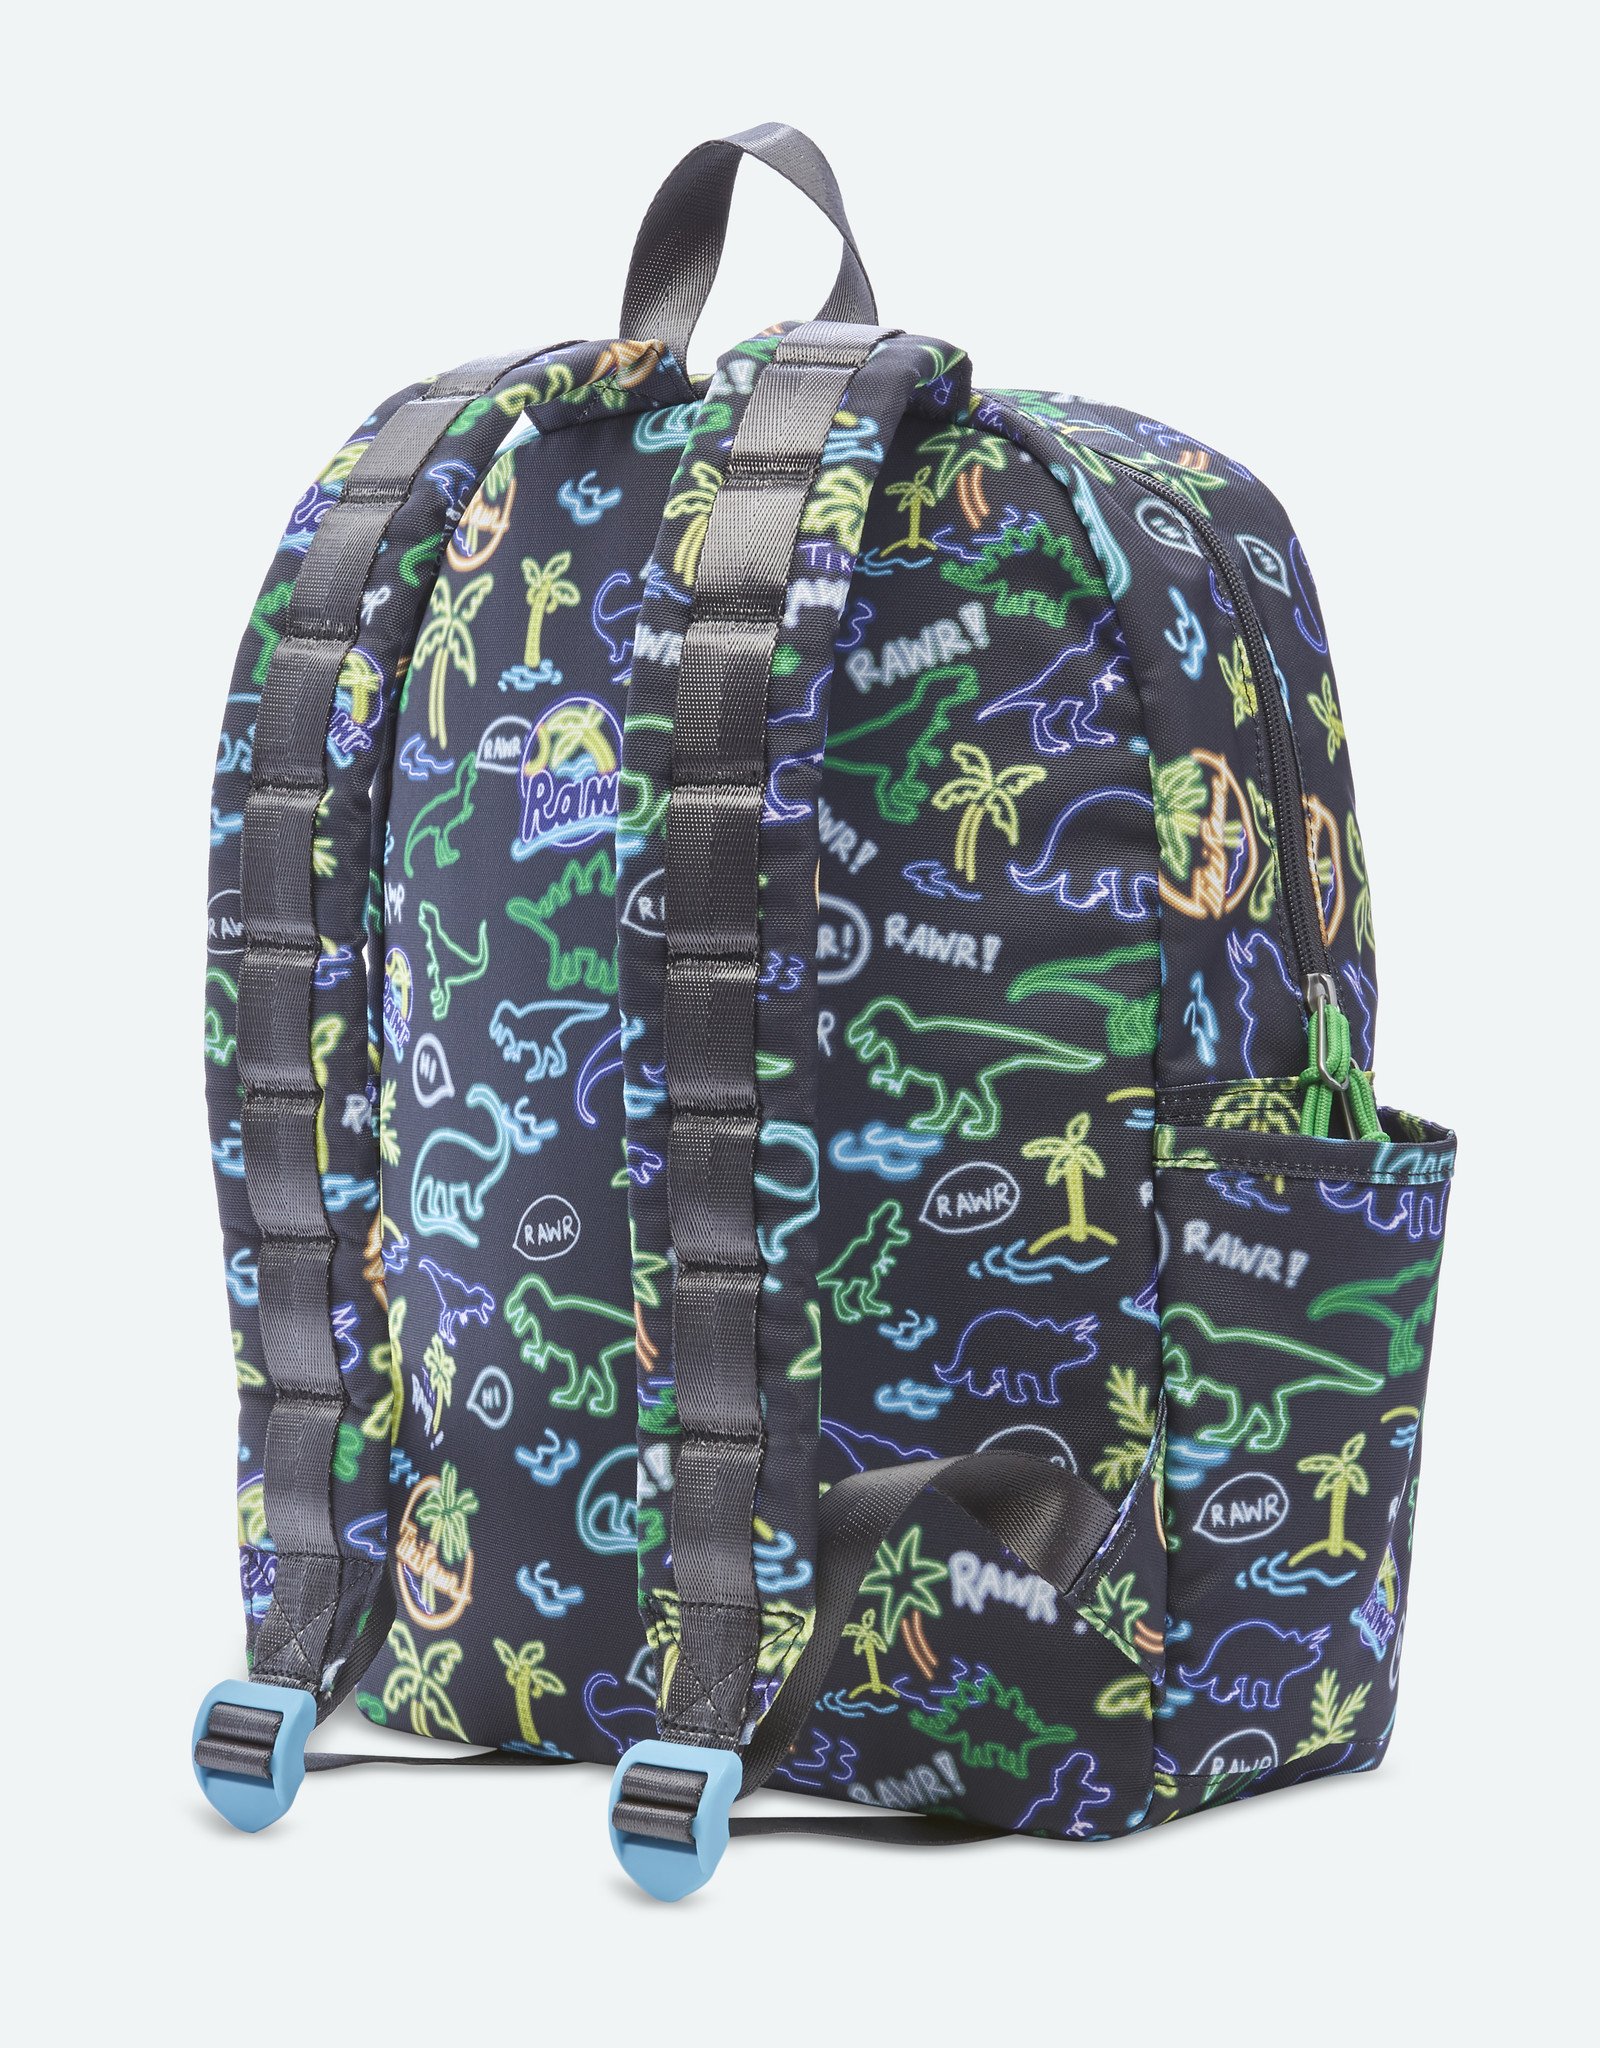 State Bags State Bags Kane Kids Backpack - Neon Dino